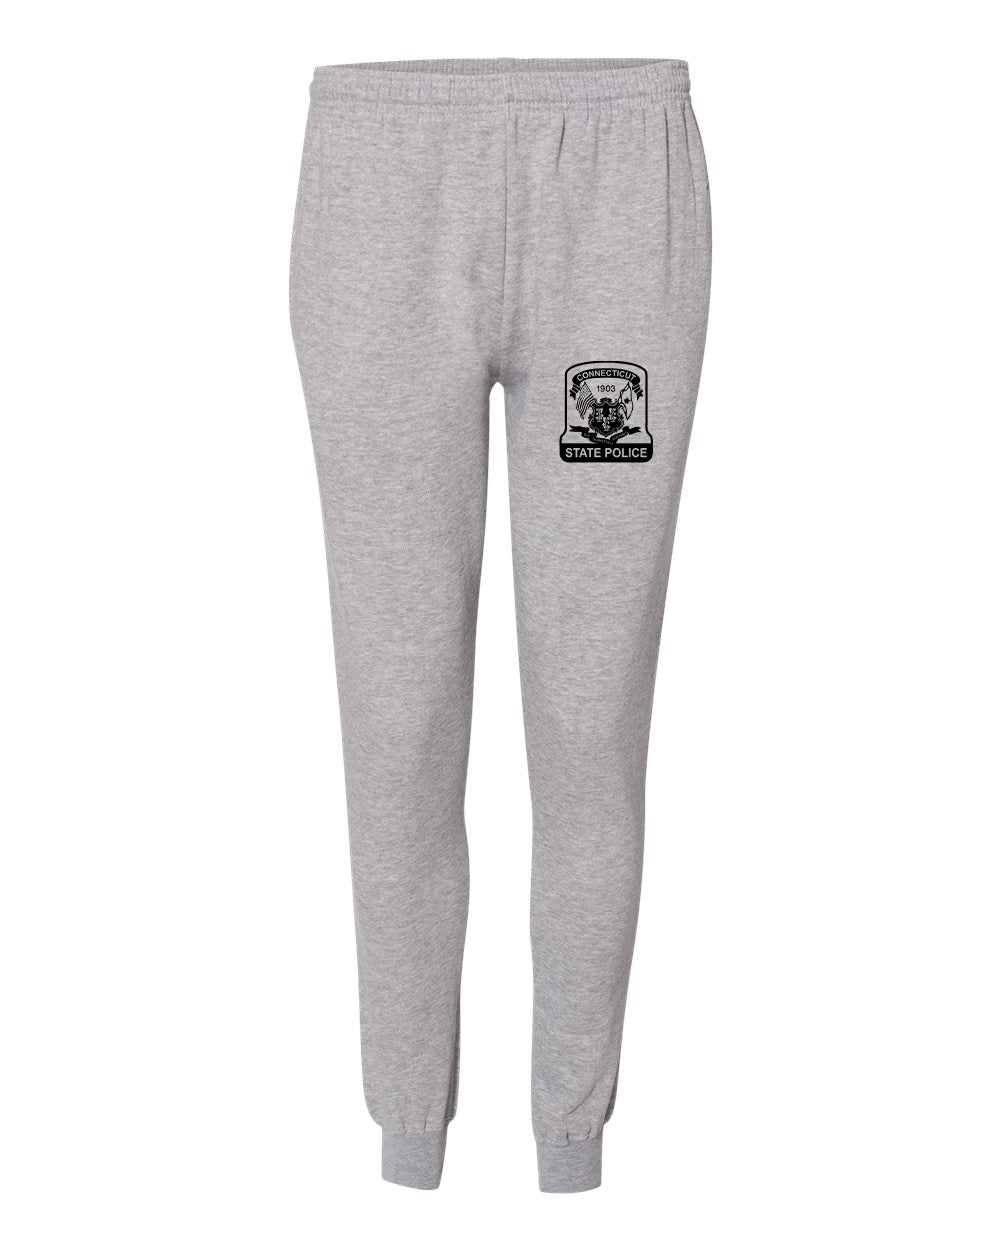 CTSP Adult Badger Joggers - 1215 (color options available)